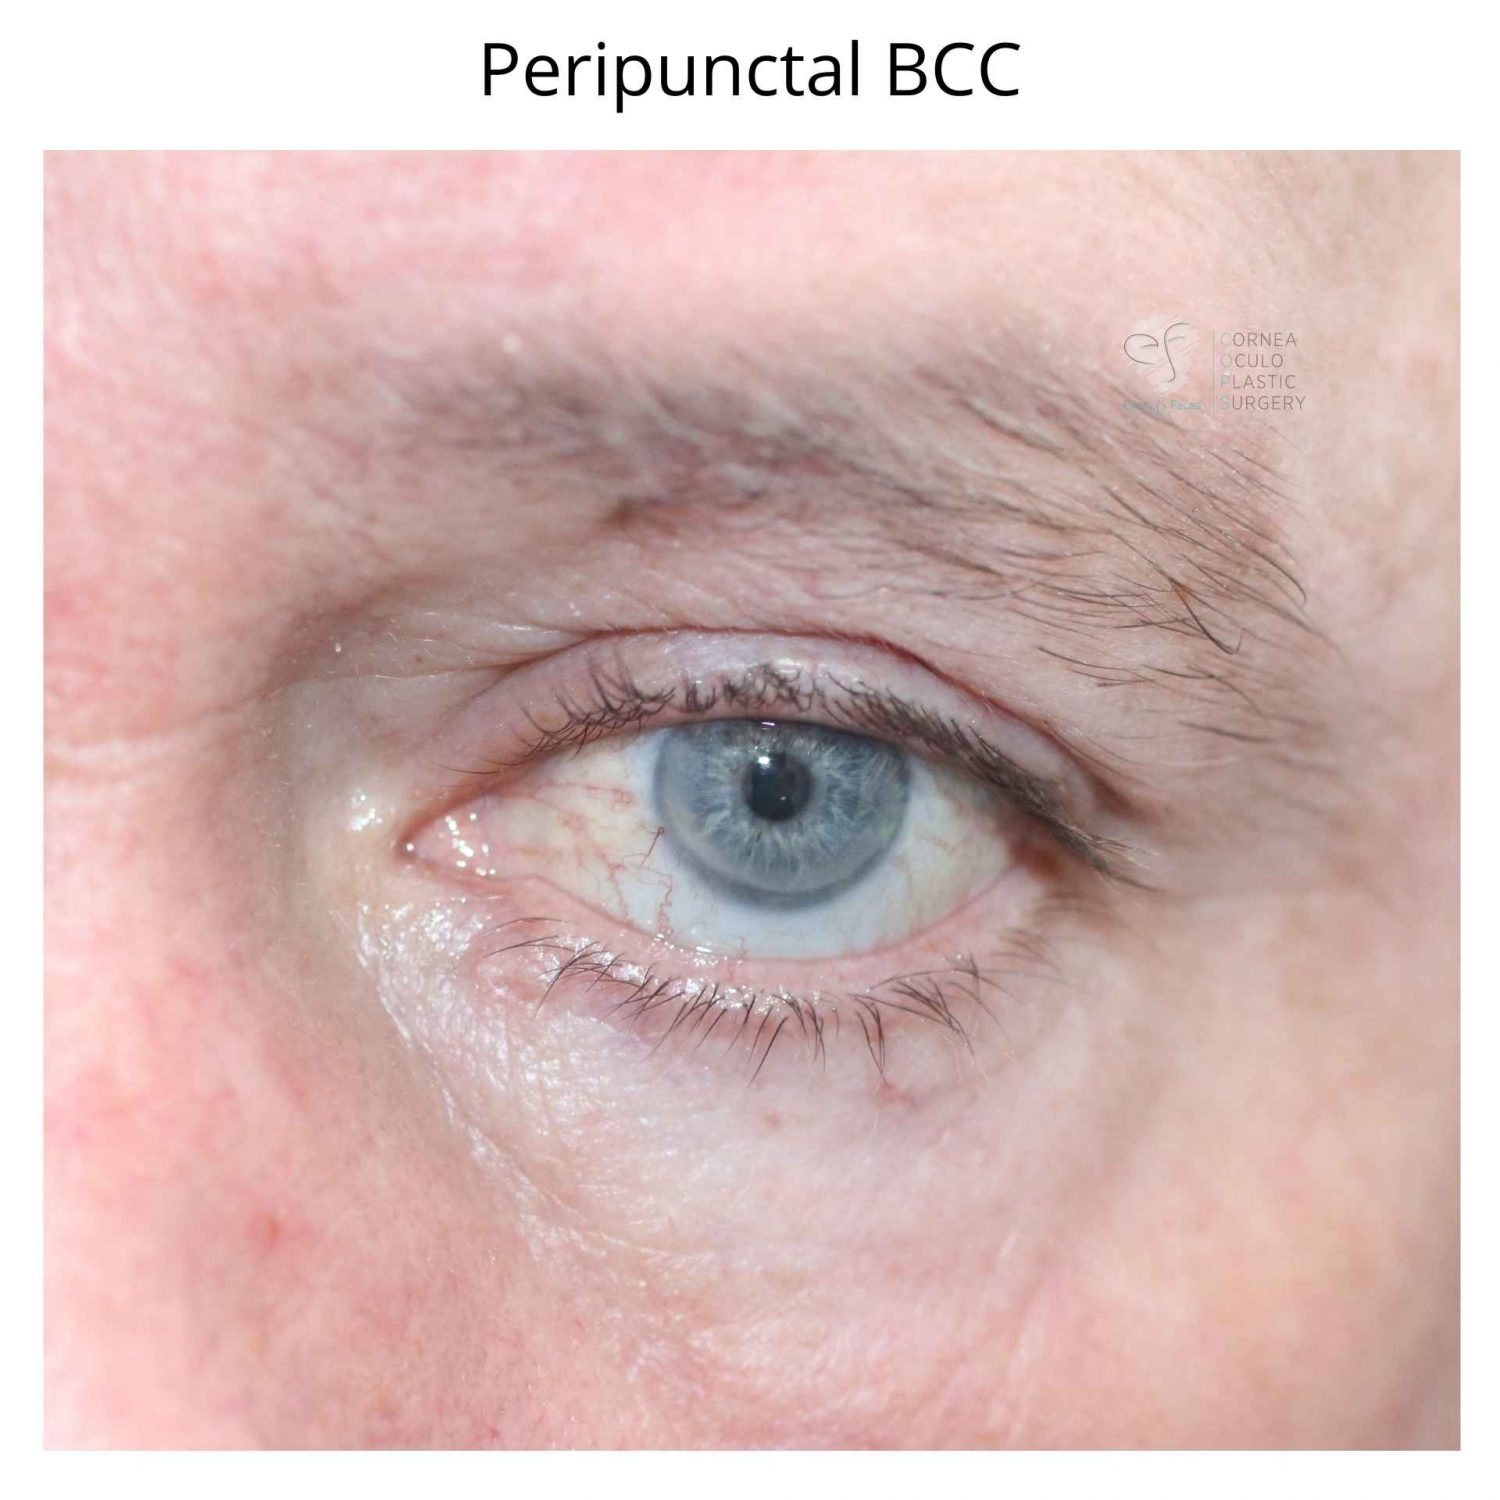 Peripunctal BCC - this shows a lump on the lower eyelid just near the peripunctum.